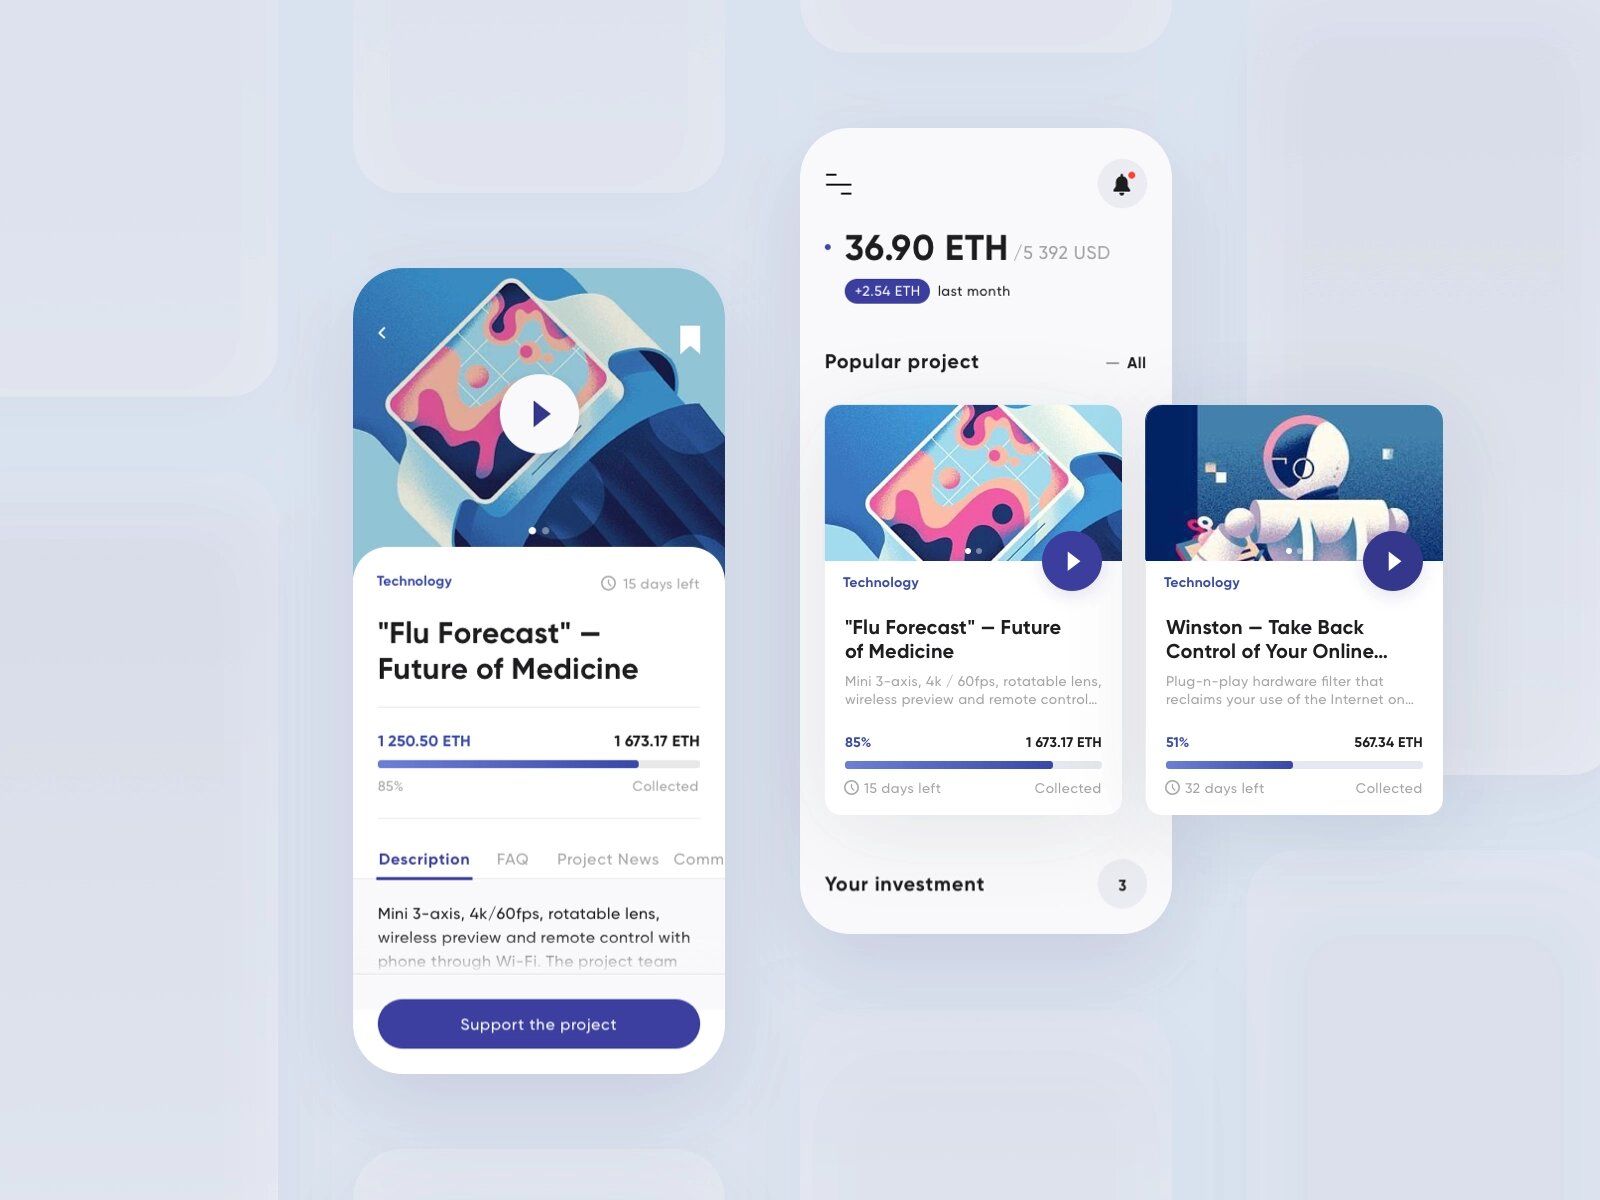 Creating a crowdfunding platform implies creating a place to list every crowdfunding campaign you have on your crowdfunding software (*image by [Leonid Arestov](https://dribbble.com/arestov_design){ rel="nofollow" target="_blank" .default-md}*)